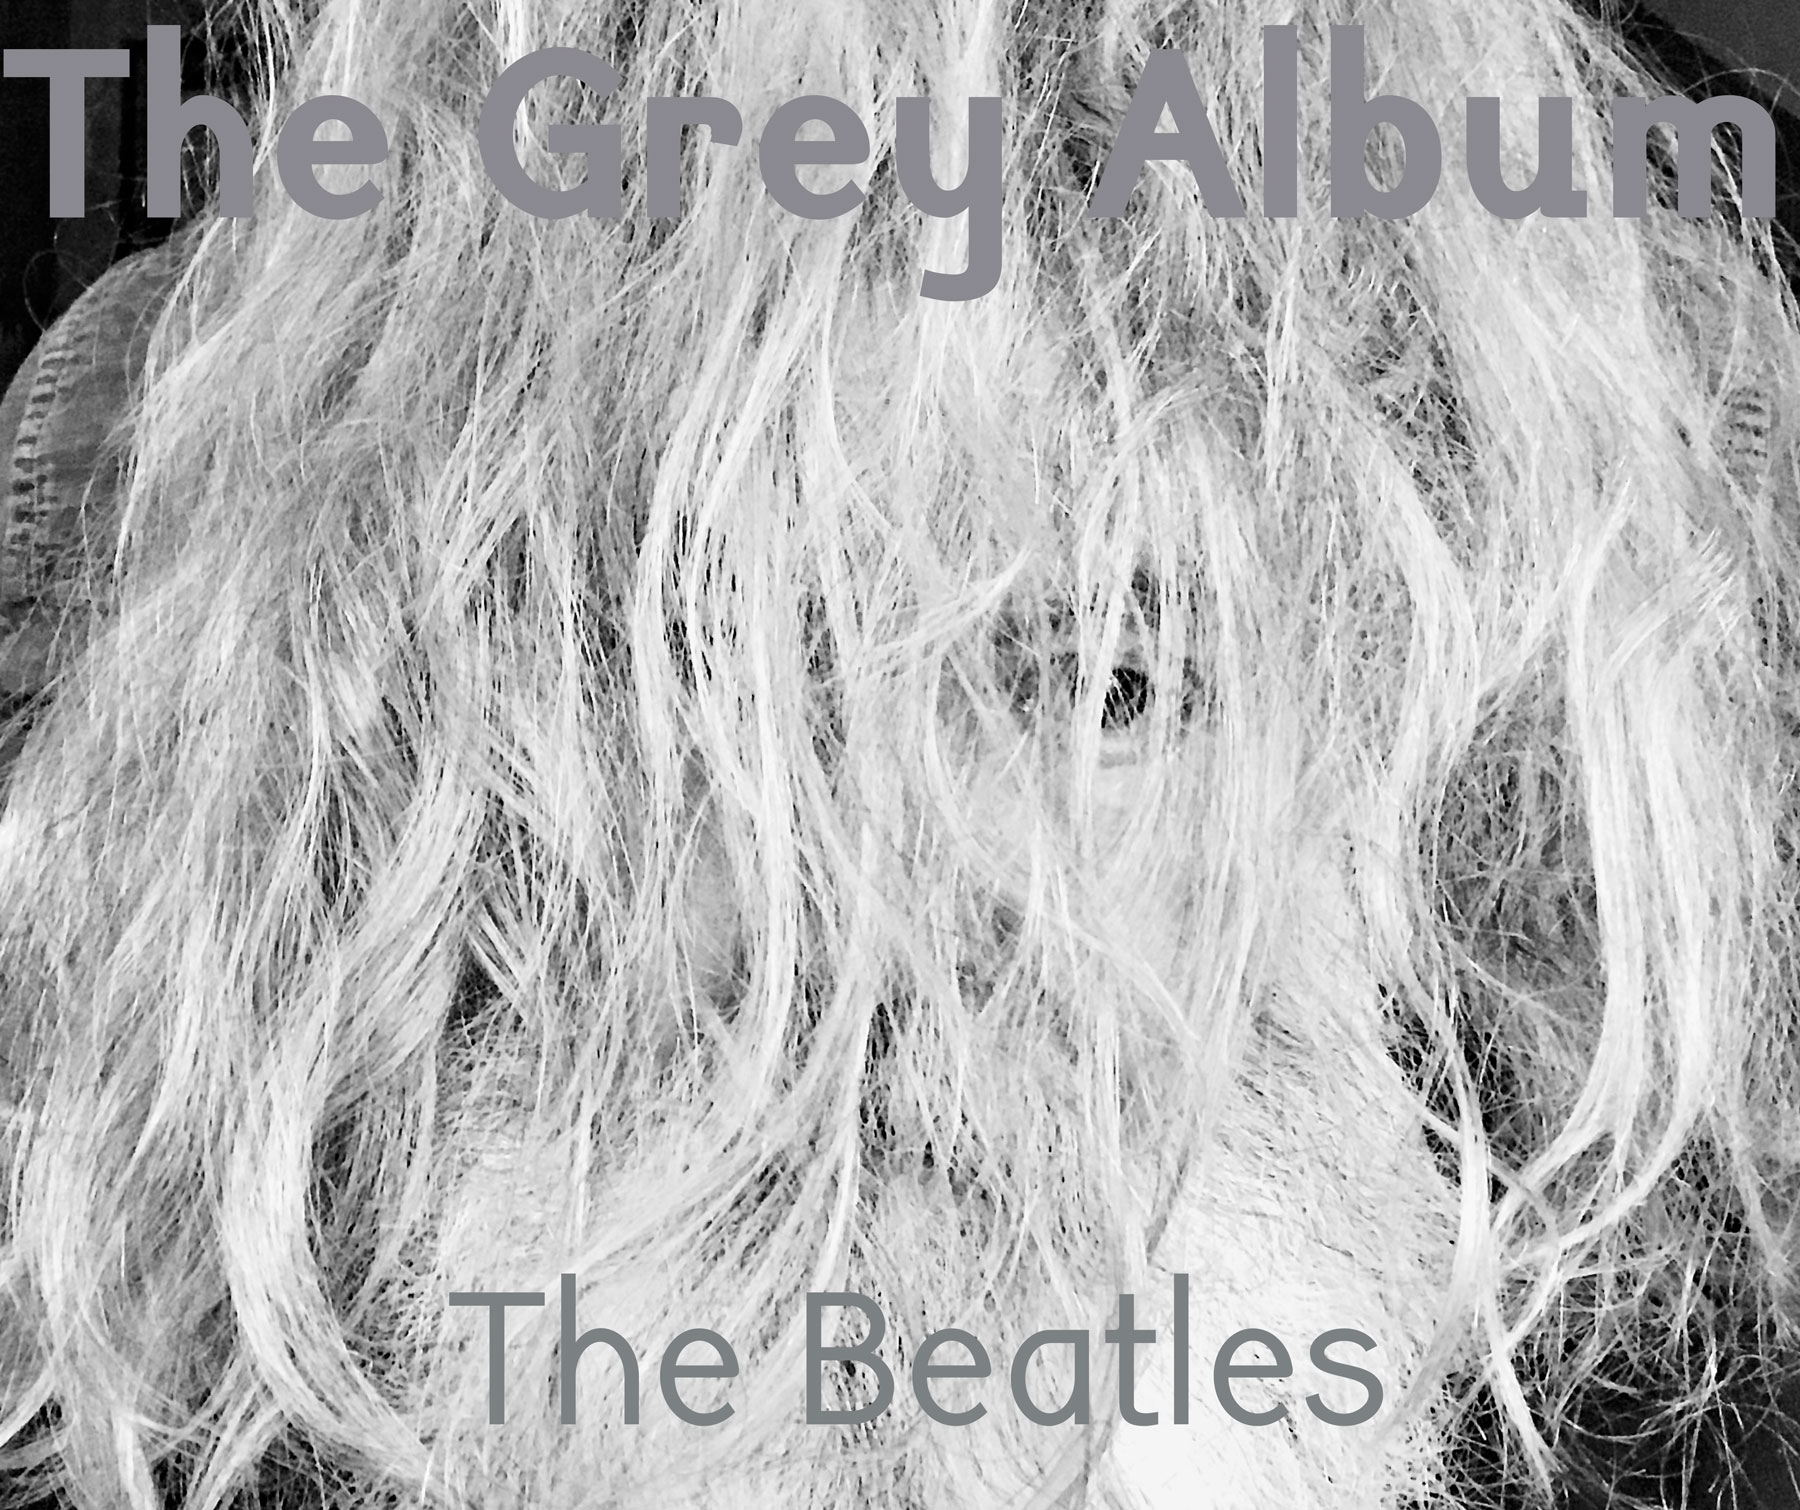 Greyscale image of very hairy man, with long white hear and white beard. A large bold grey title at the top ‘The Grey Album’, then in thinner typography at the bottom ‘The Beatles’